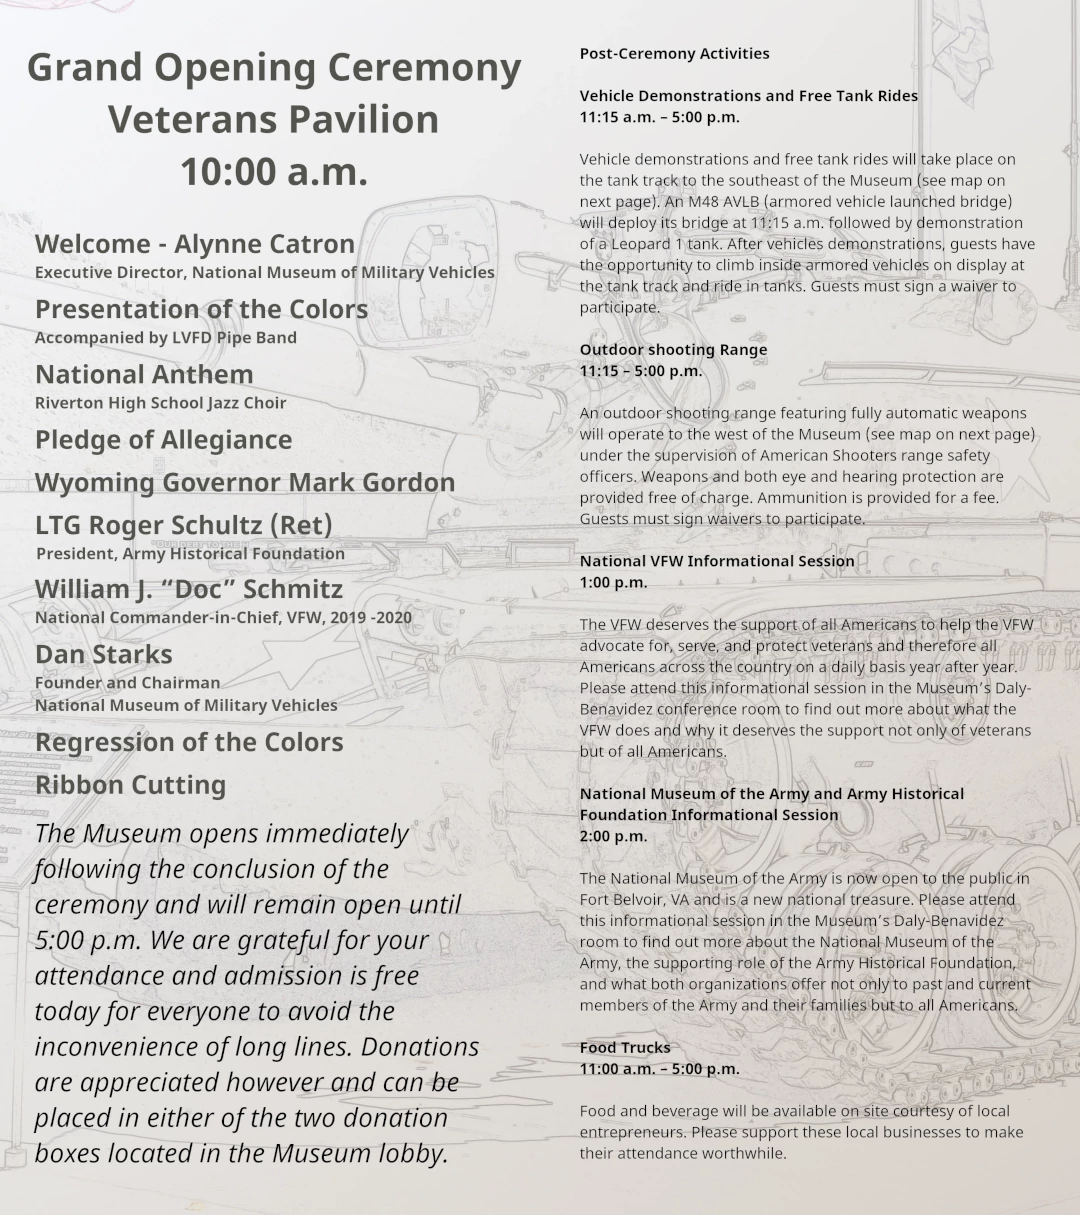 Grand Opening Program - National Museum of Military Vehicles